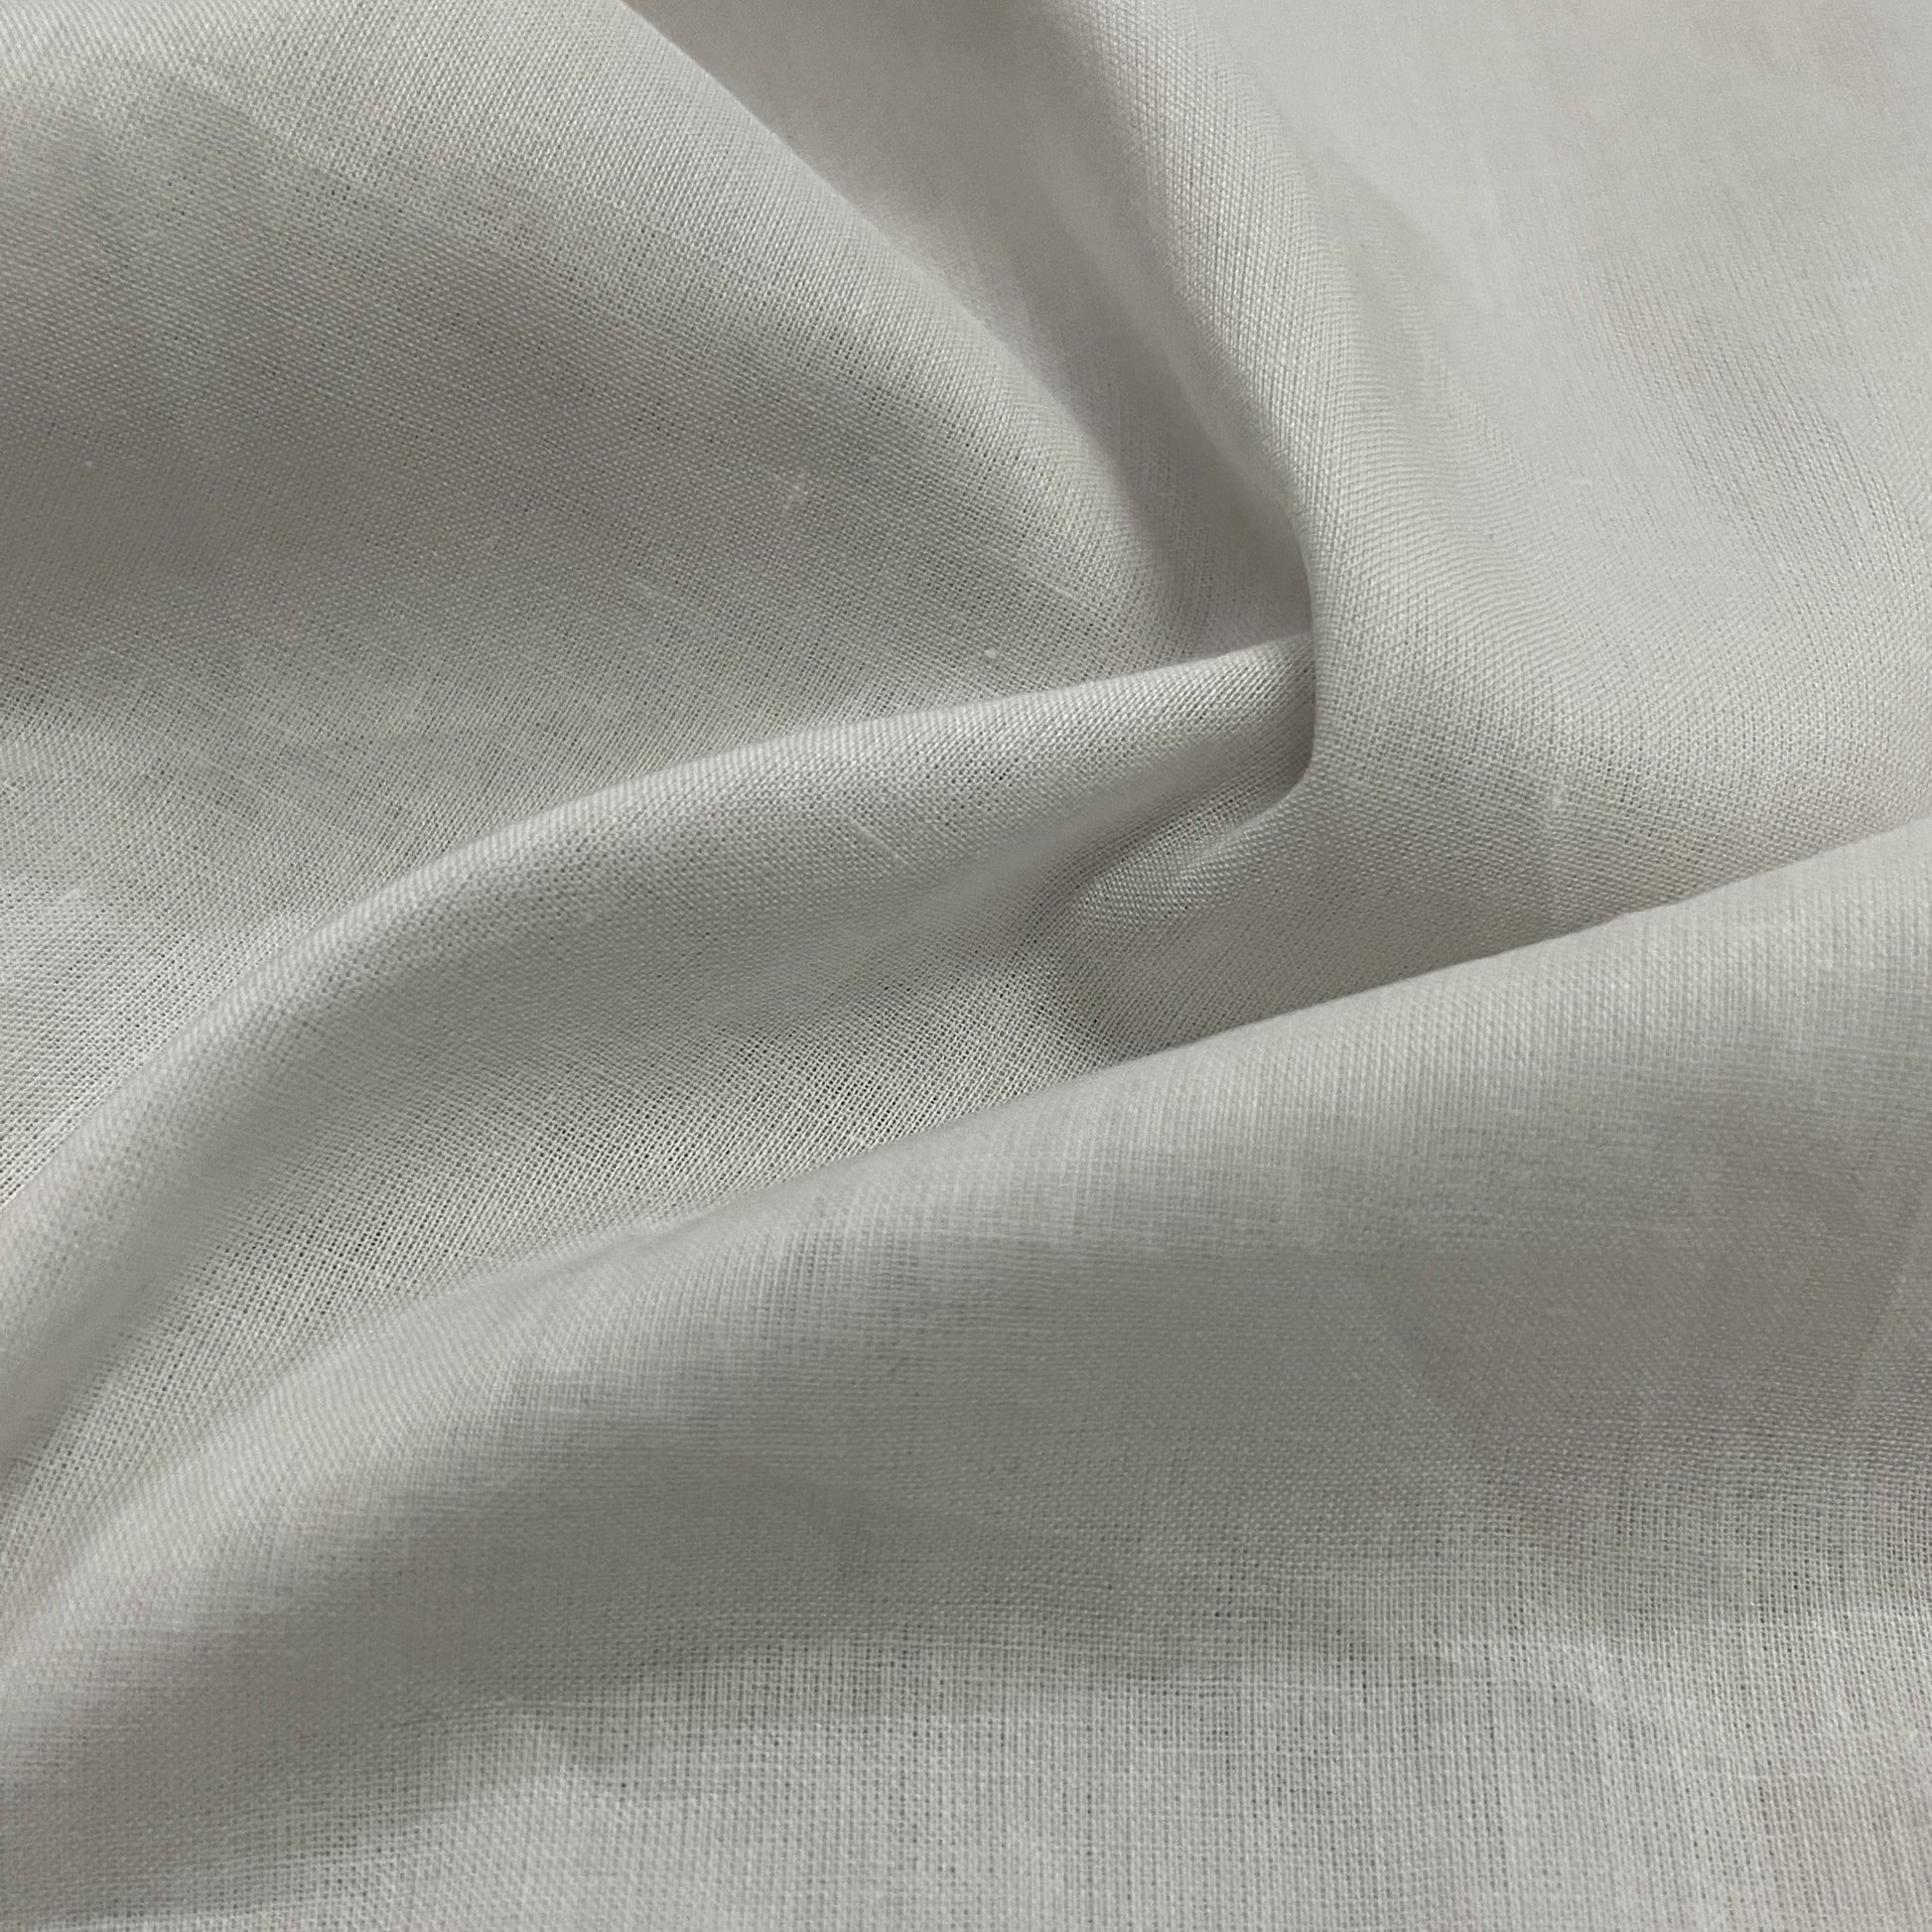 Classic White RFD Voil 92104 Lawn Cotton Malma Dyeable Cotton Fabric